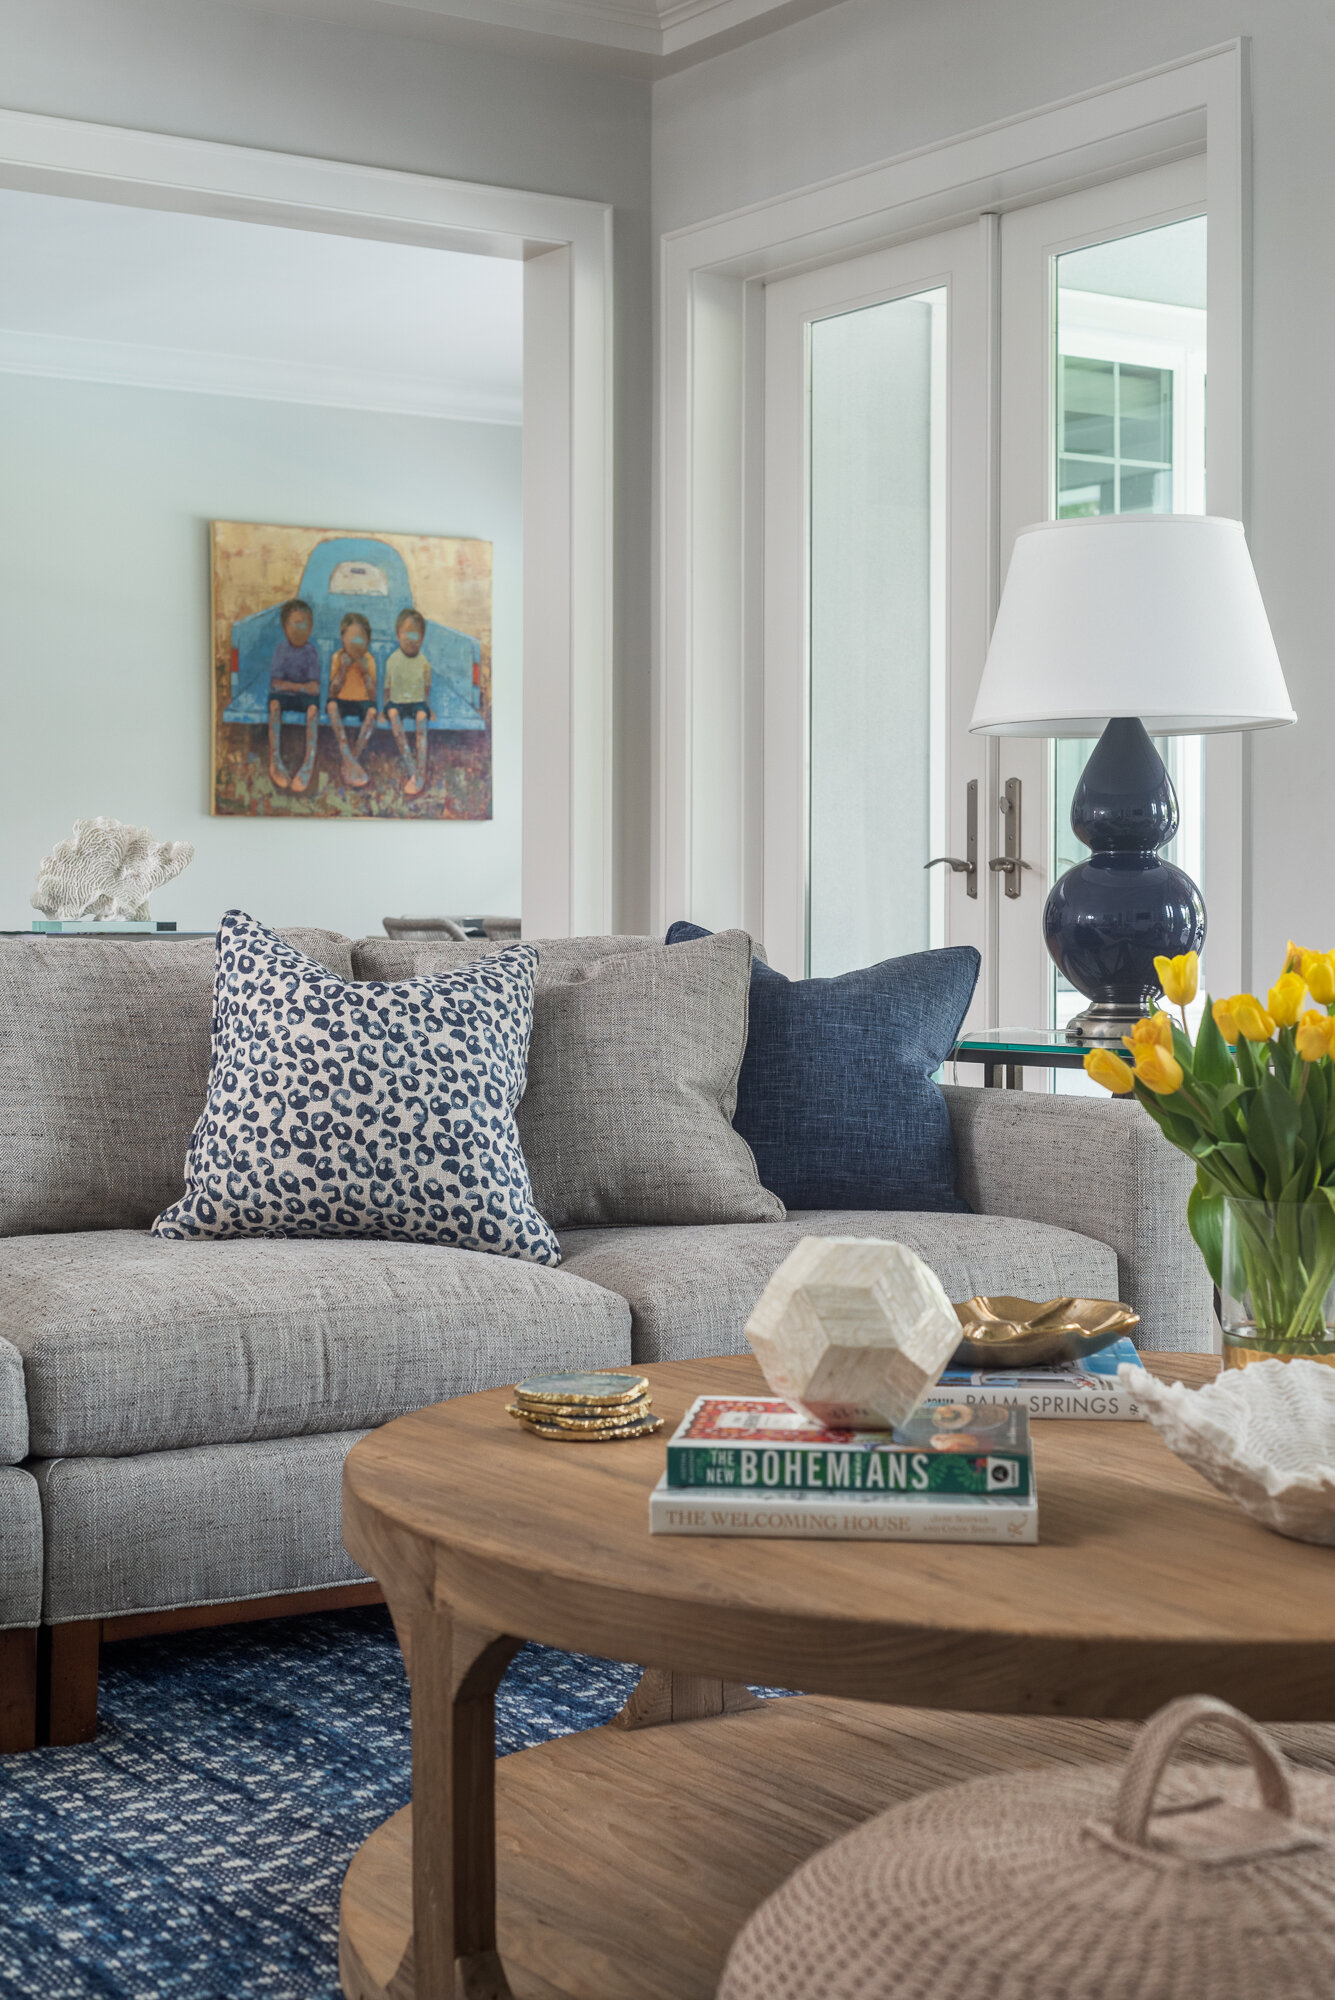 Grey couch, wood coffee table, blue pillow and lamp accents